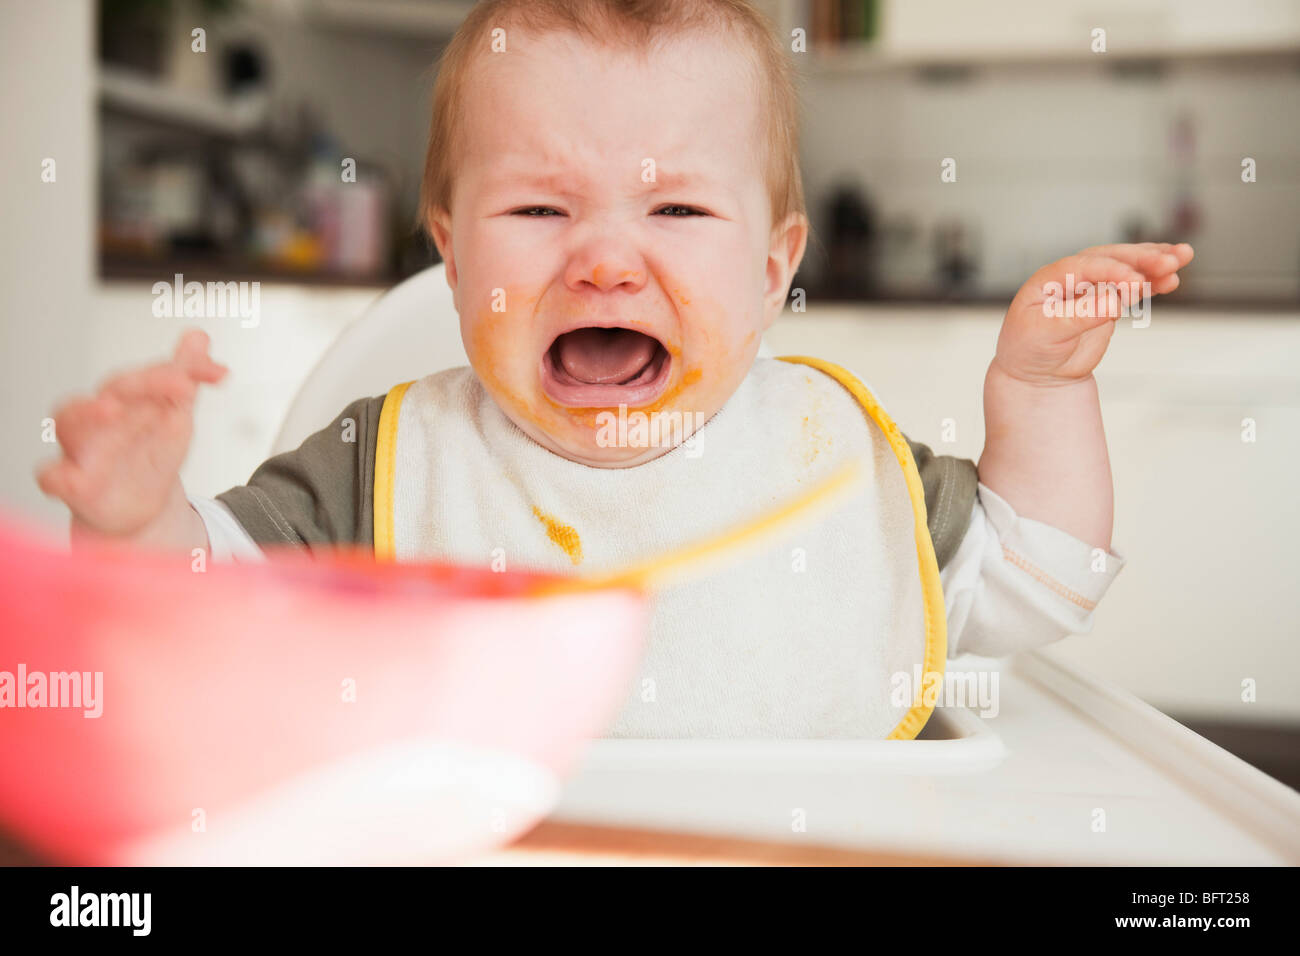 Crying Baby in High Chair Stock Photo